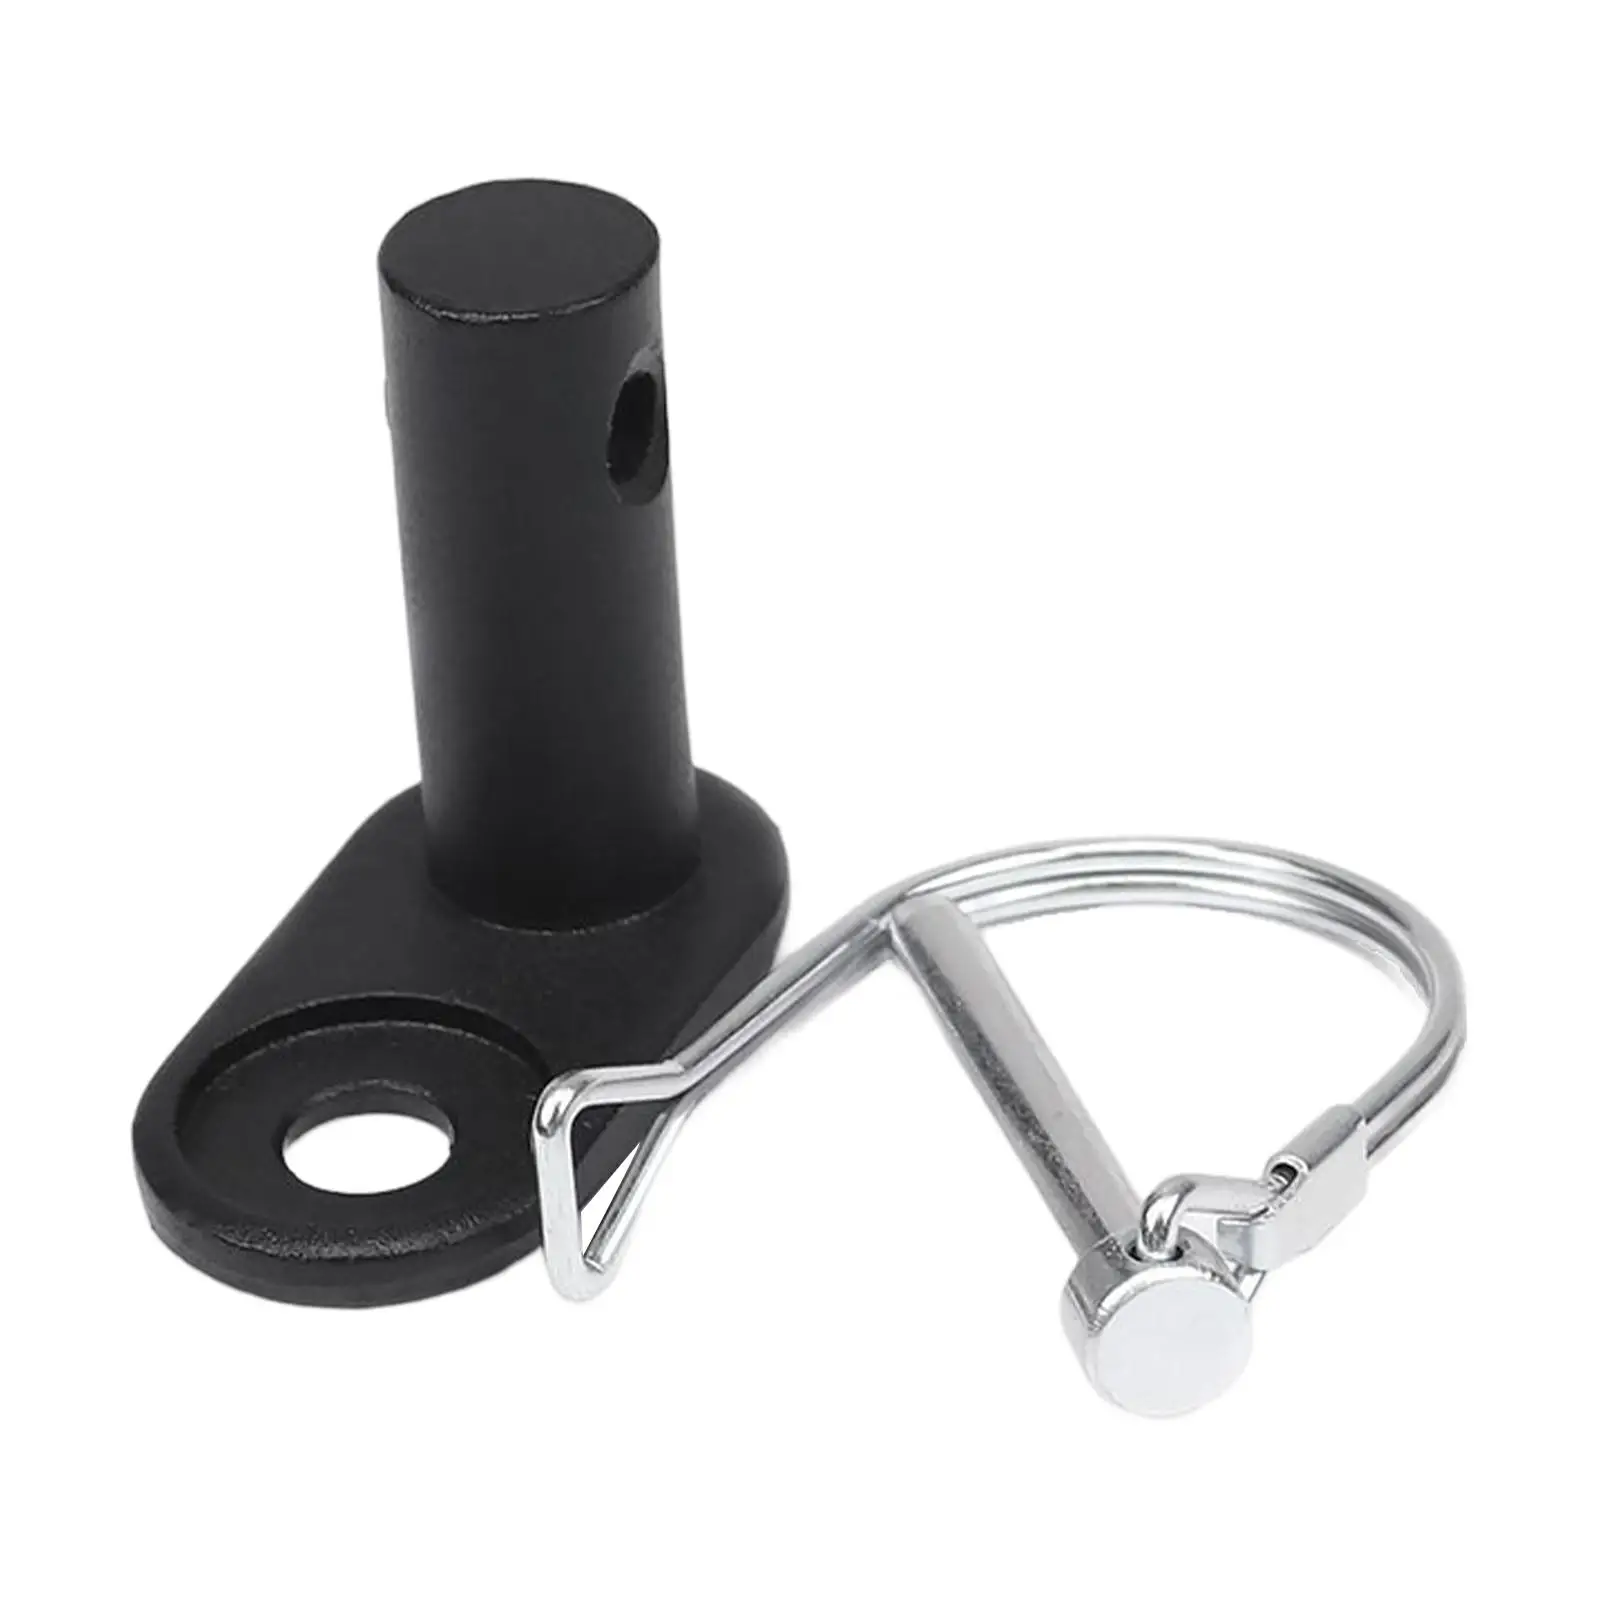 Bike Trailer Hitch Connector Carbon Steel Bicycle Trailer Coupler for Children, Pet, Cargo Trailers